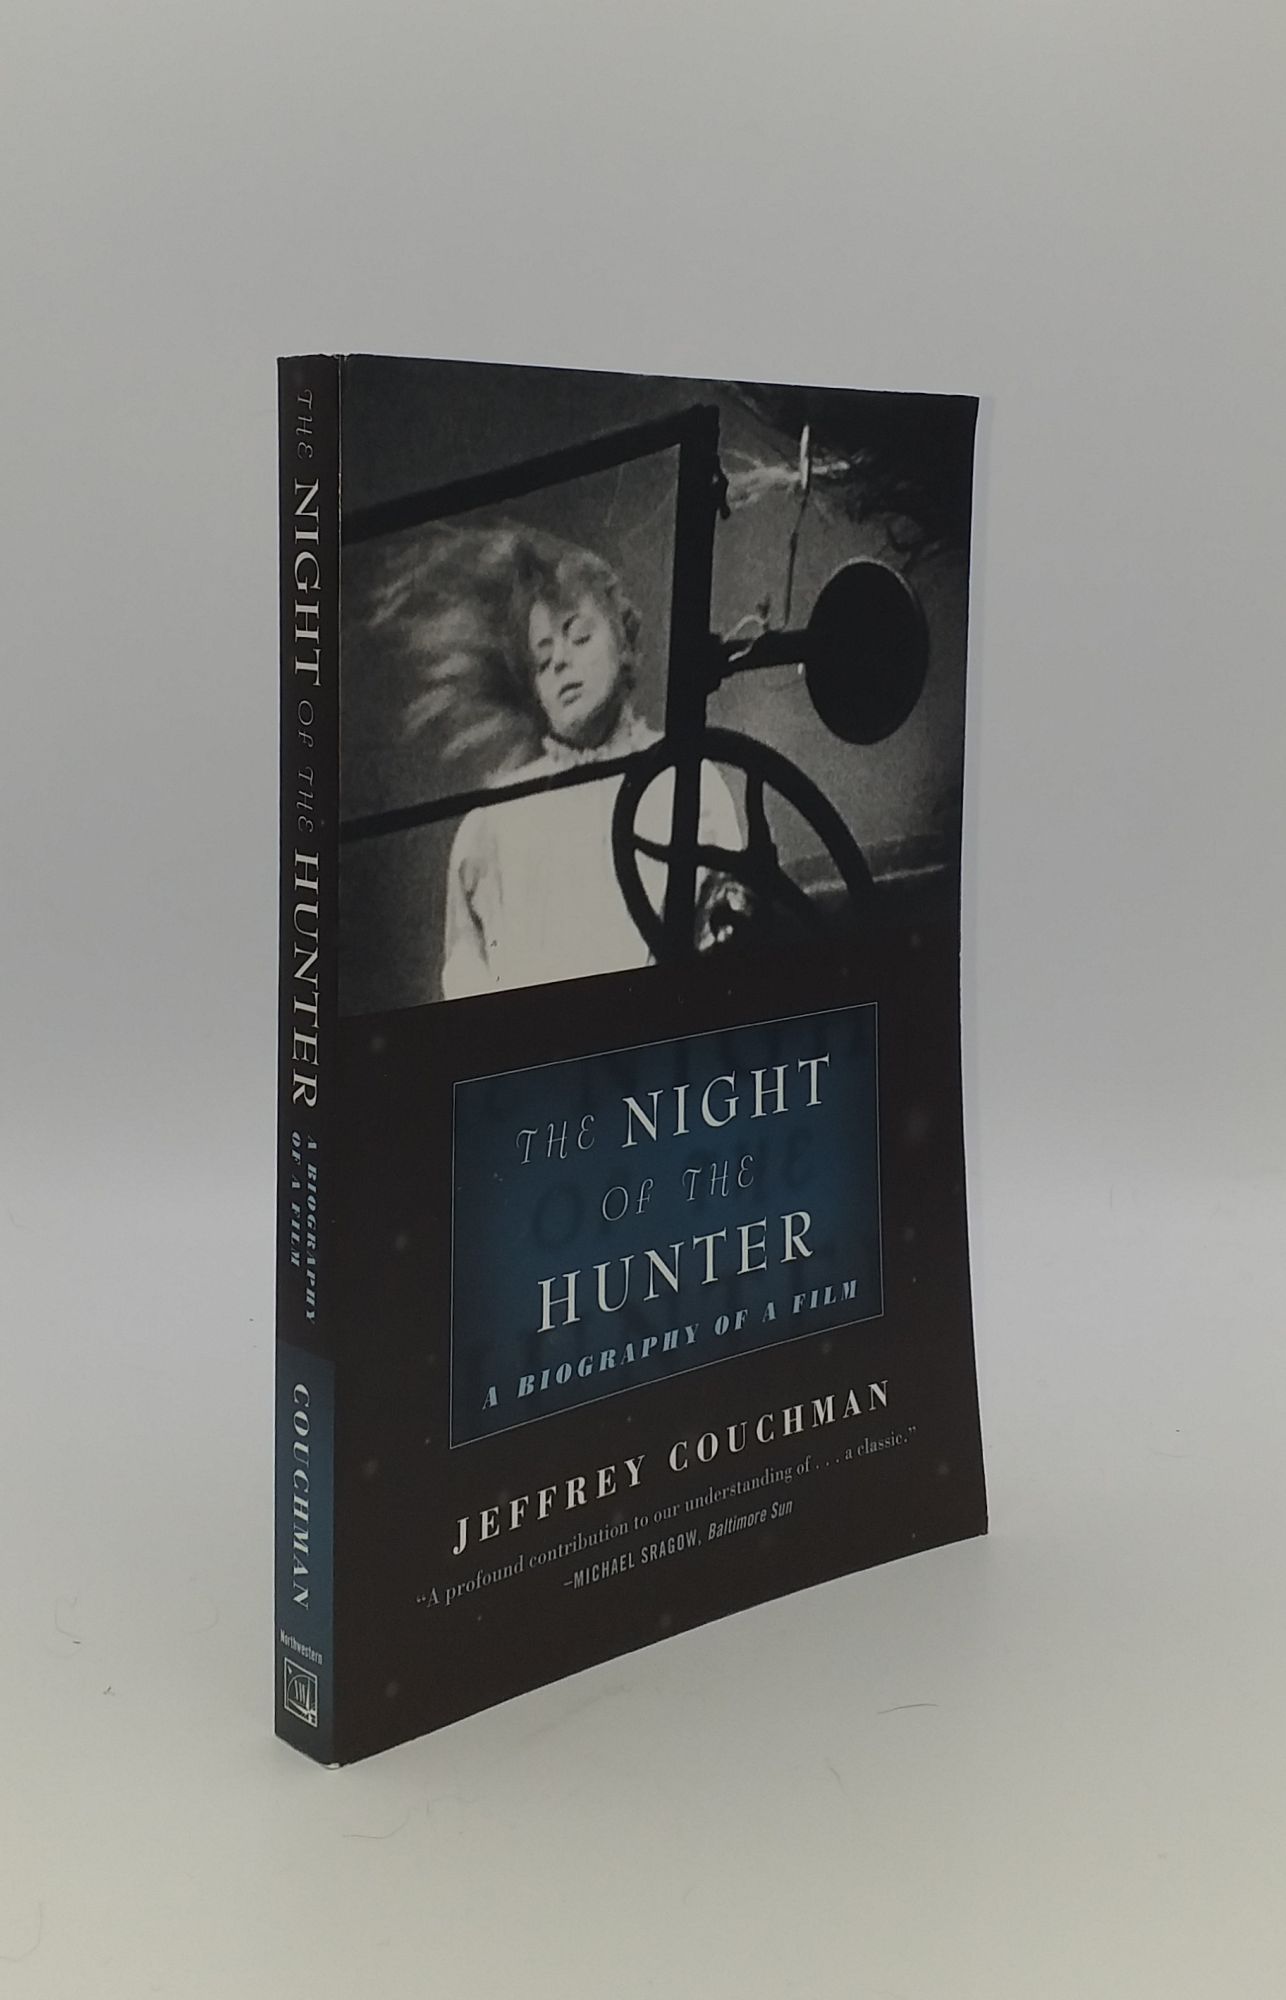 THE NIGHT OF THE HUNTER A Biography of a Film - COUCHMAN Jeffrey